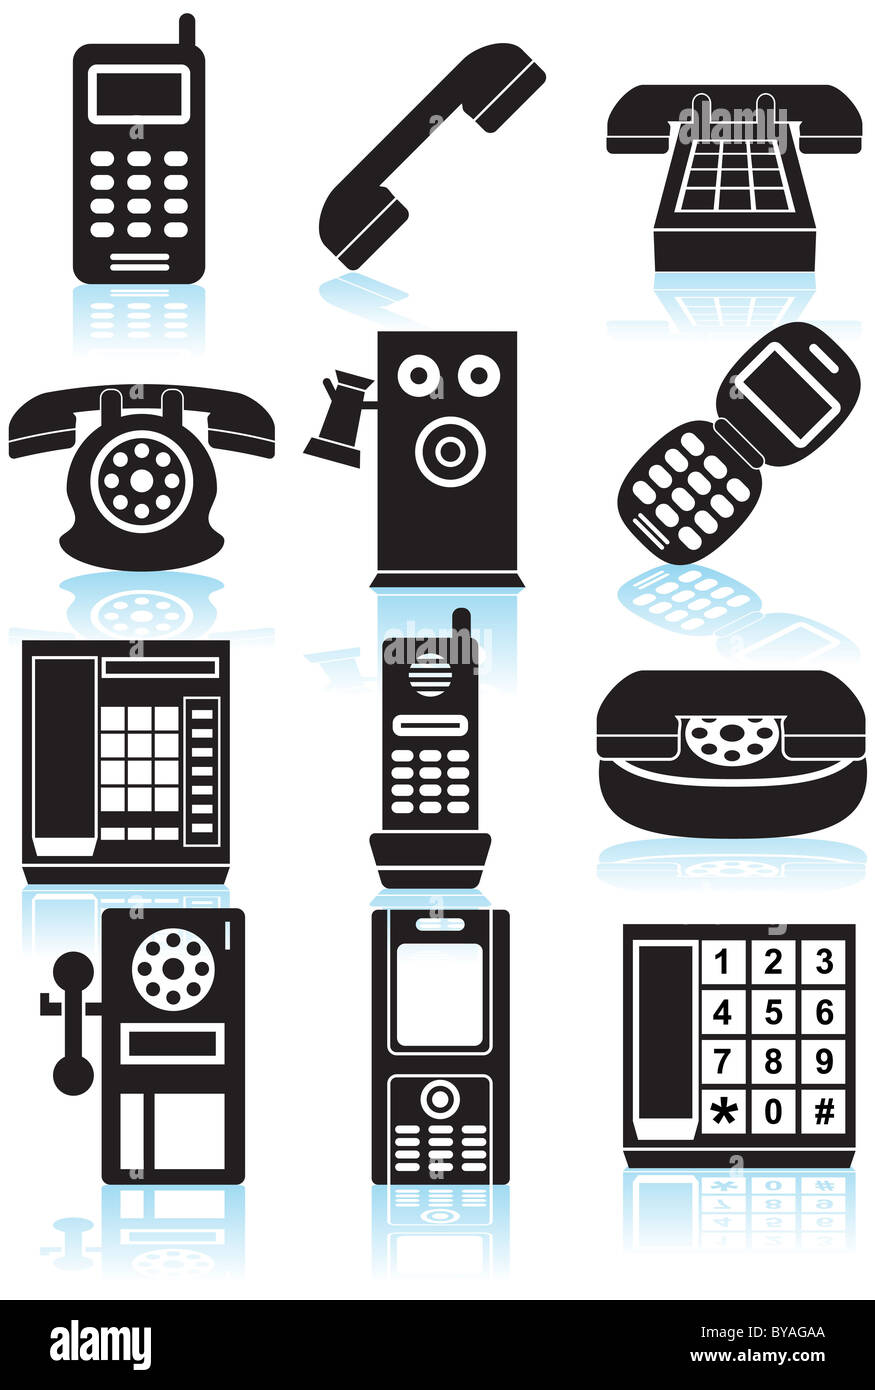 An image of a phone icon set. Stock Photo